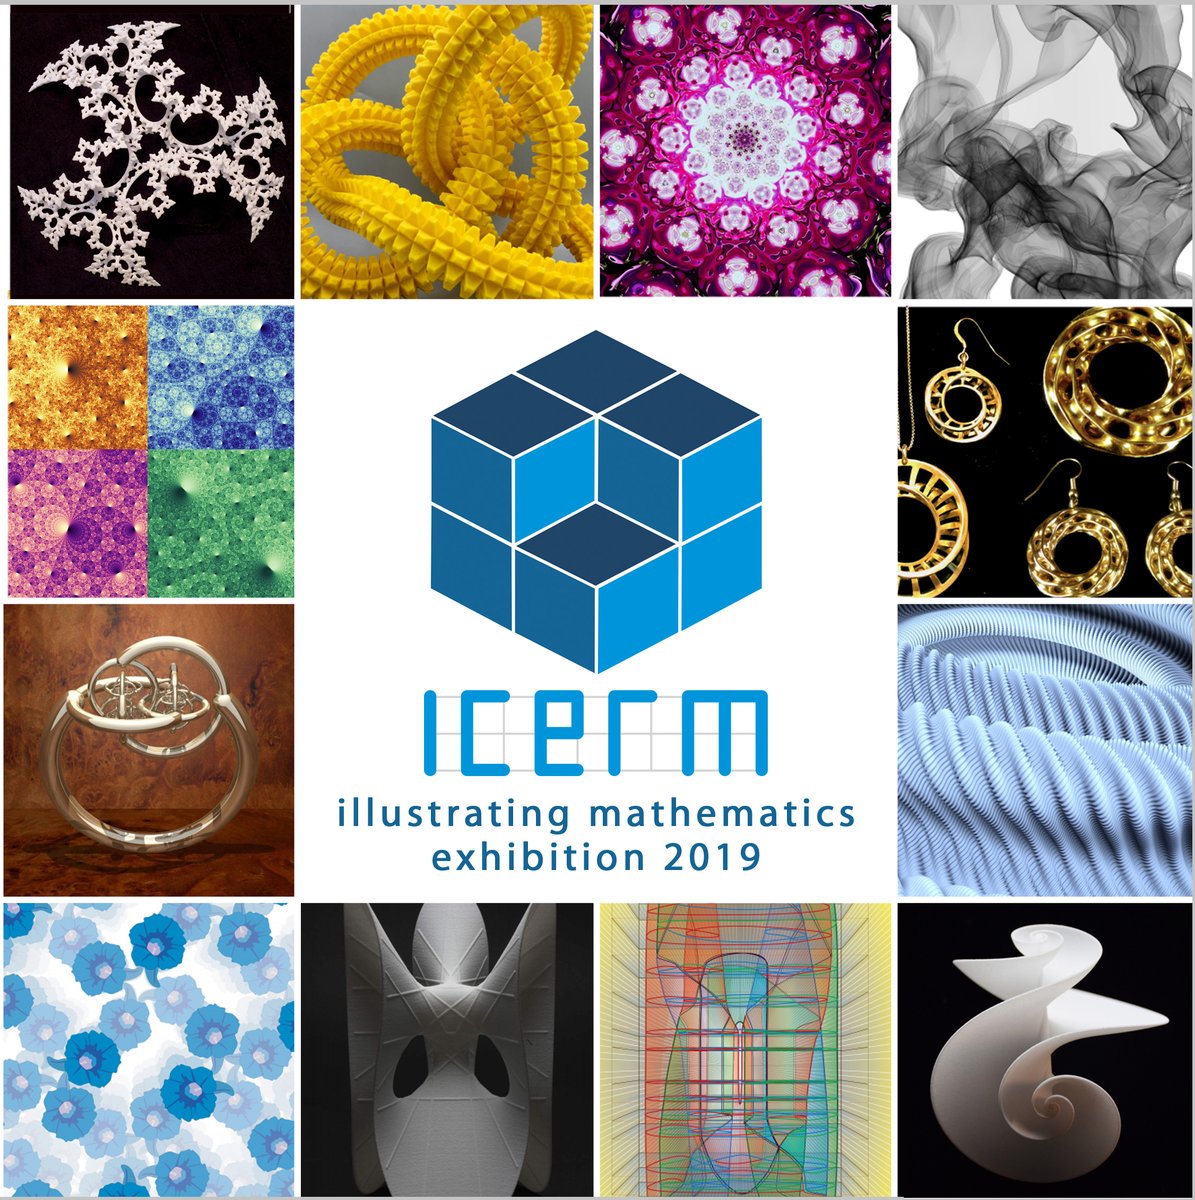 Mathematicians from around the world converged on @BrownUniversity @ICERM for the semester-long Illustrating Mathematics program. Now some visual highlights, bridging many branches of mathematics and artistic styles, have been packaged in a book, ICERM&#39;s first catalog.